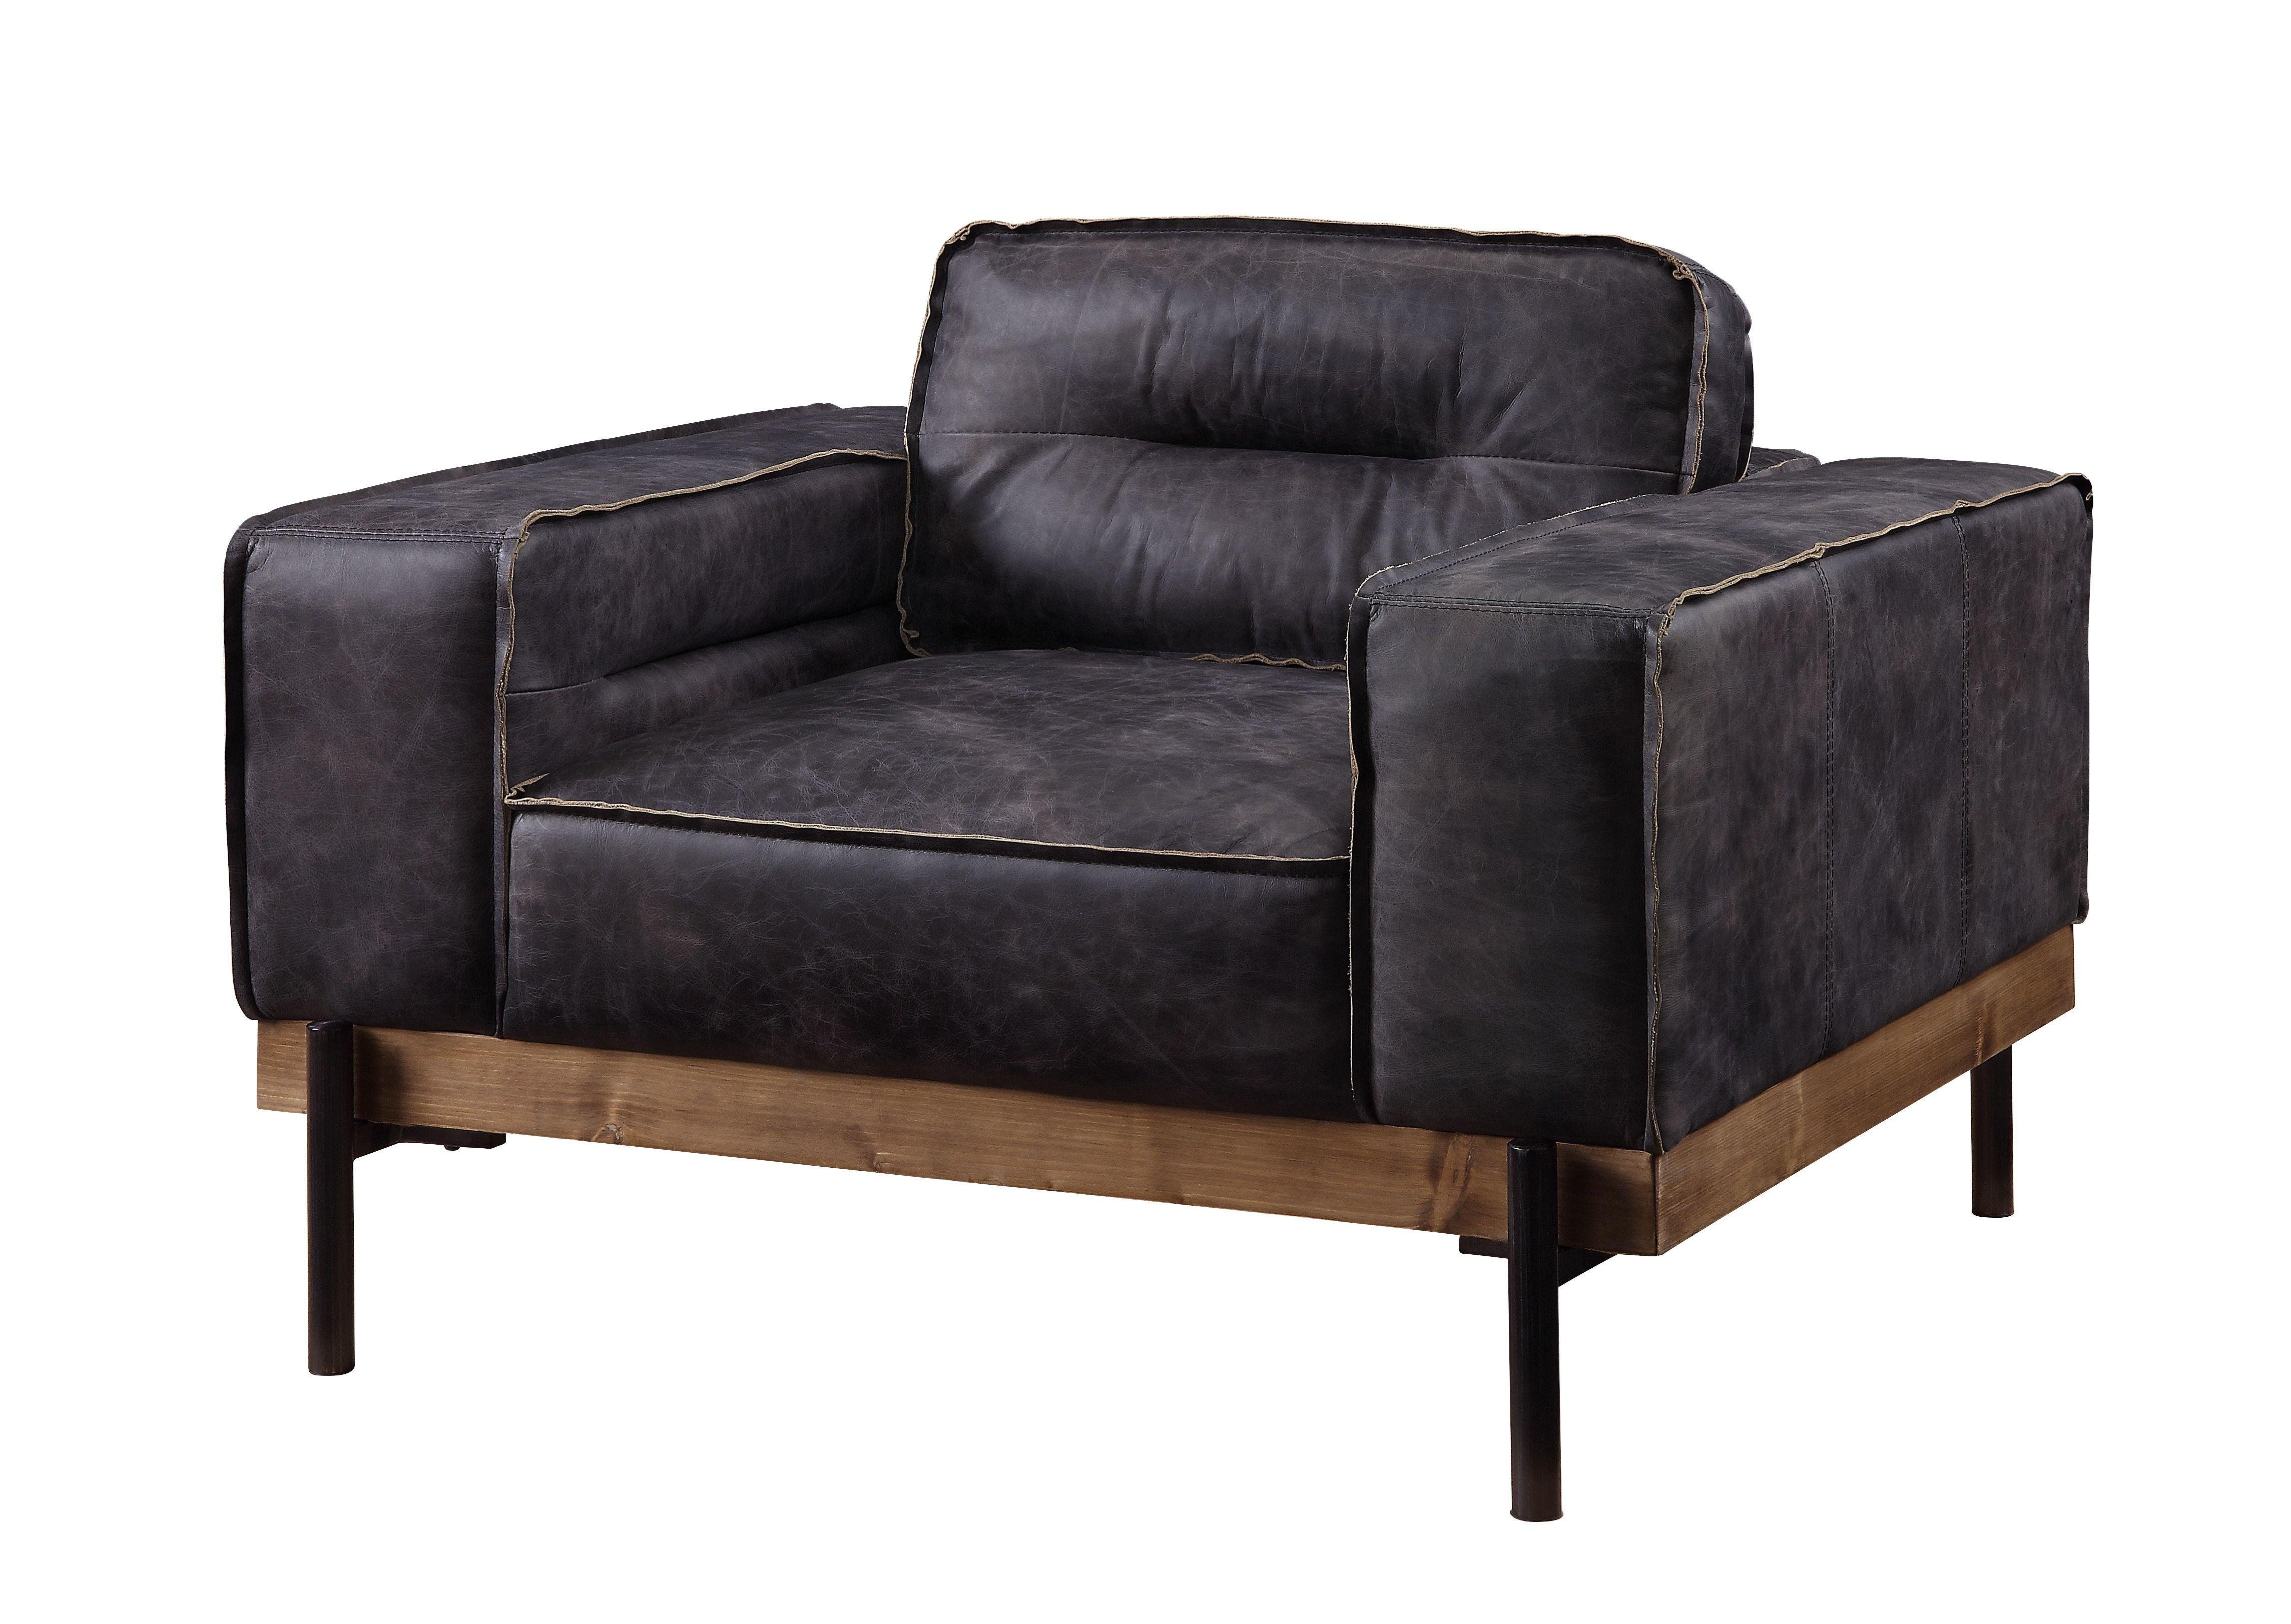 Contemporary Chair Silchester 56507 in Ebony Top grain leather